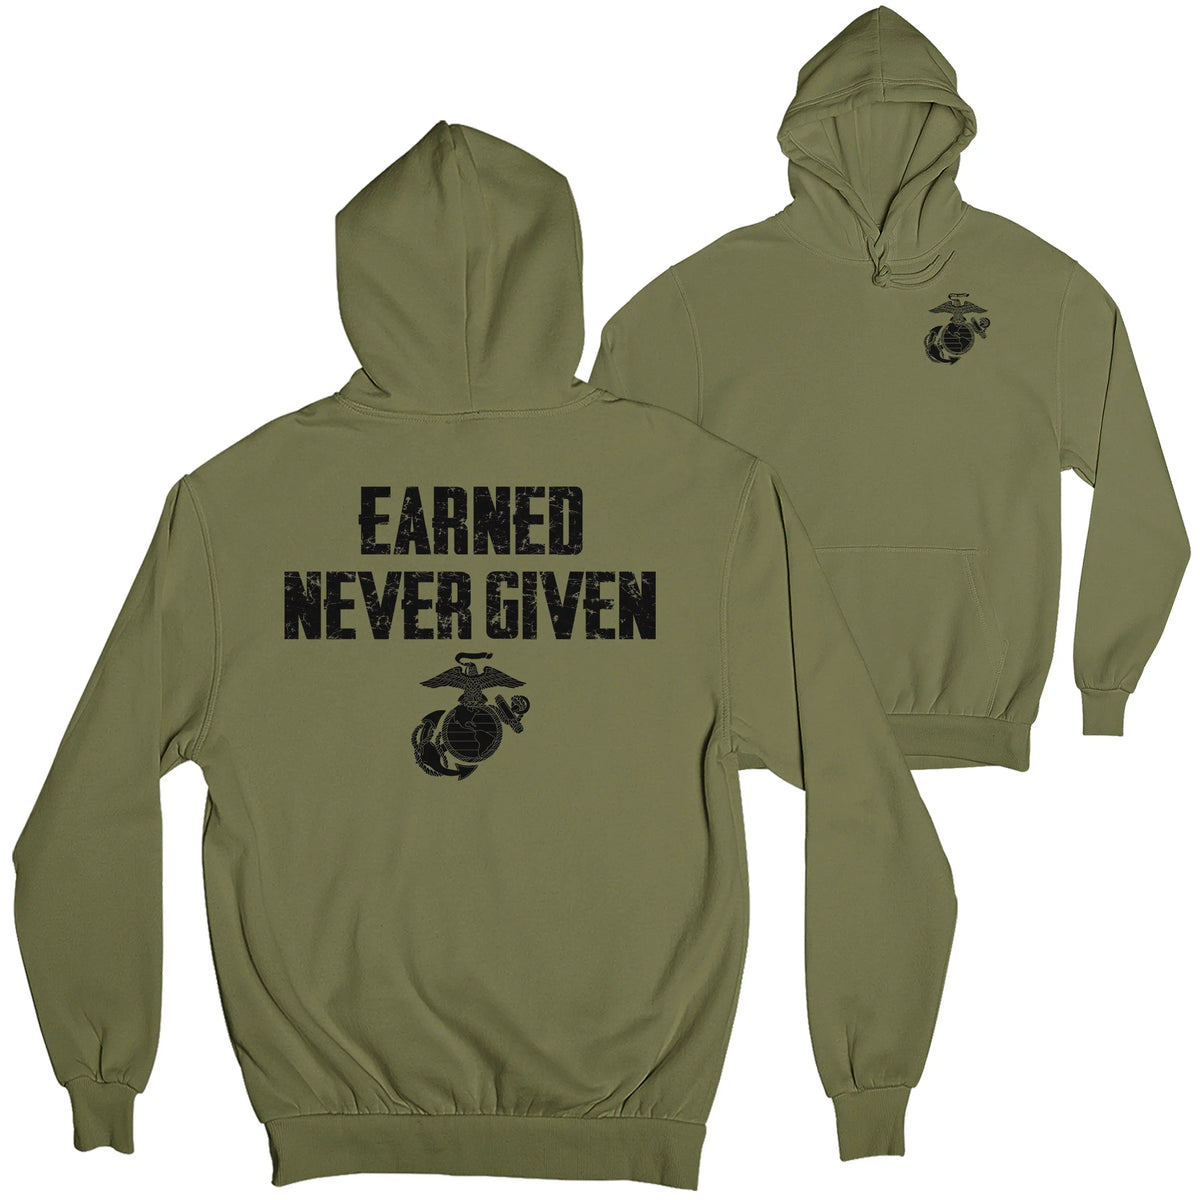 Earned Never Given 2-Sided Hoodie